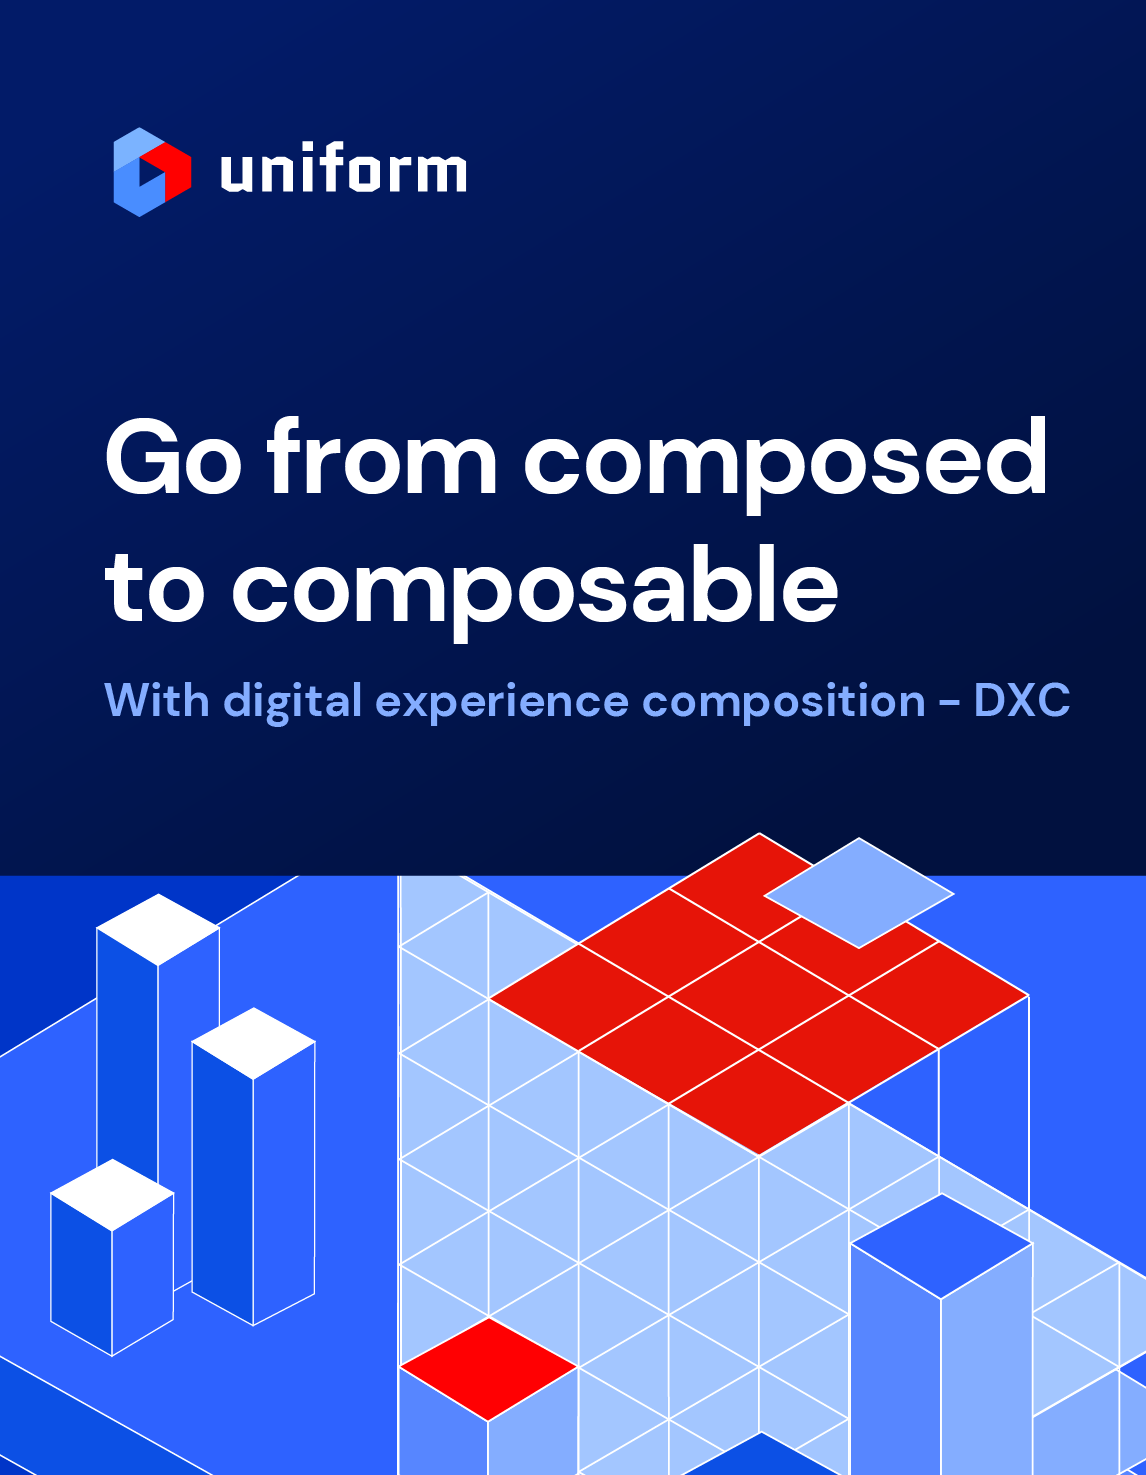 Download your guide to going from composed to composable.